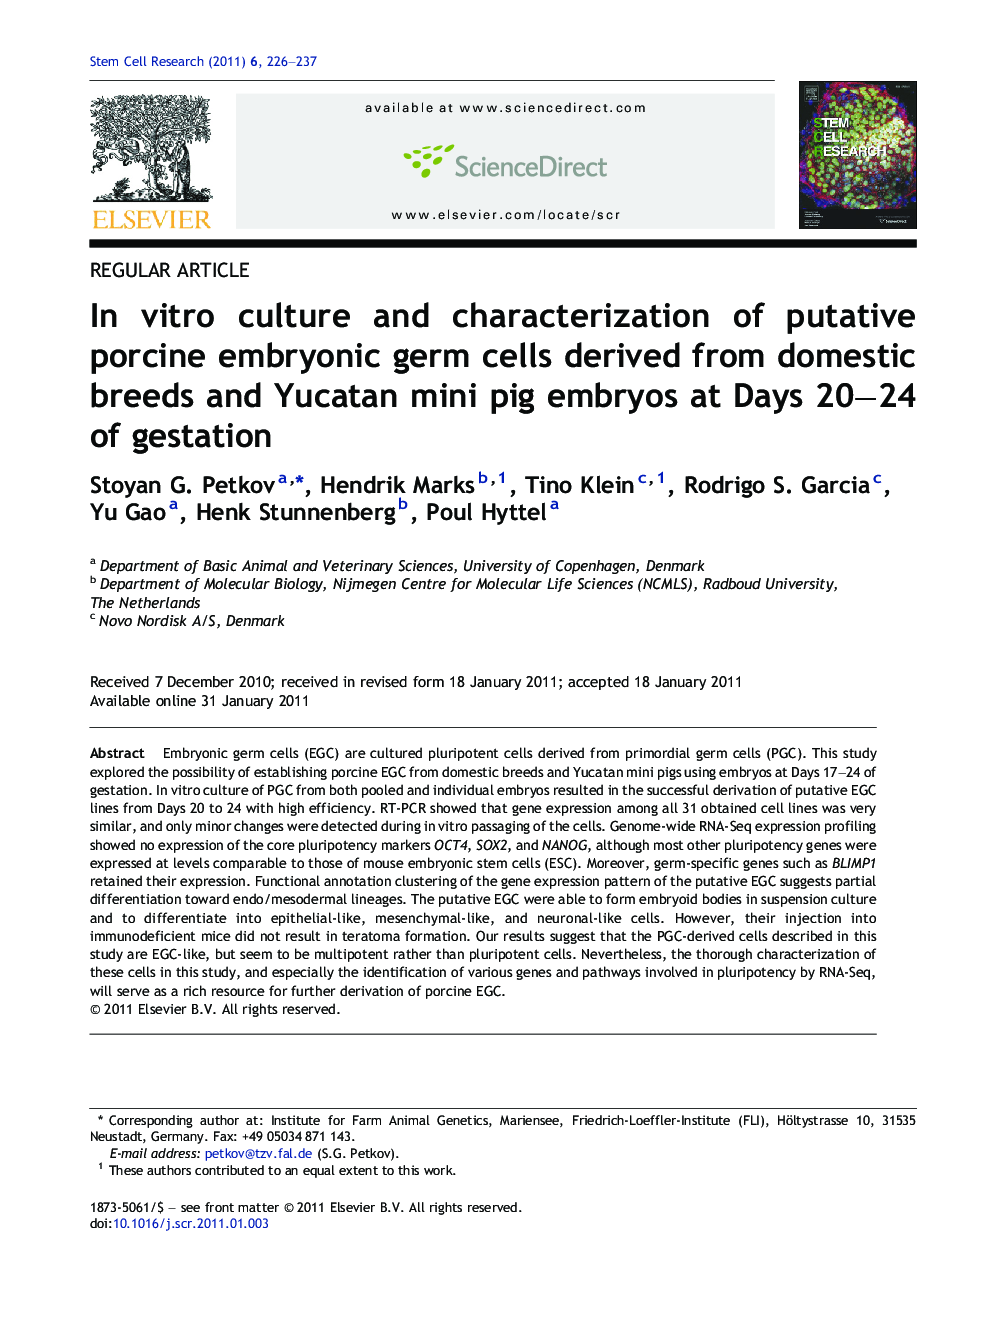 In vitro culture and characterization of putative porcine embryonic germ cells derived from domestic breeds and Yucatan mini pig embryos at Days 20-24 of gestation